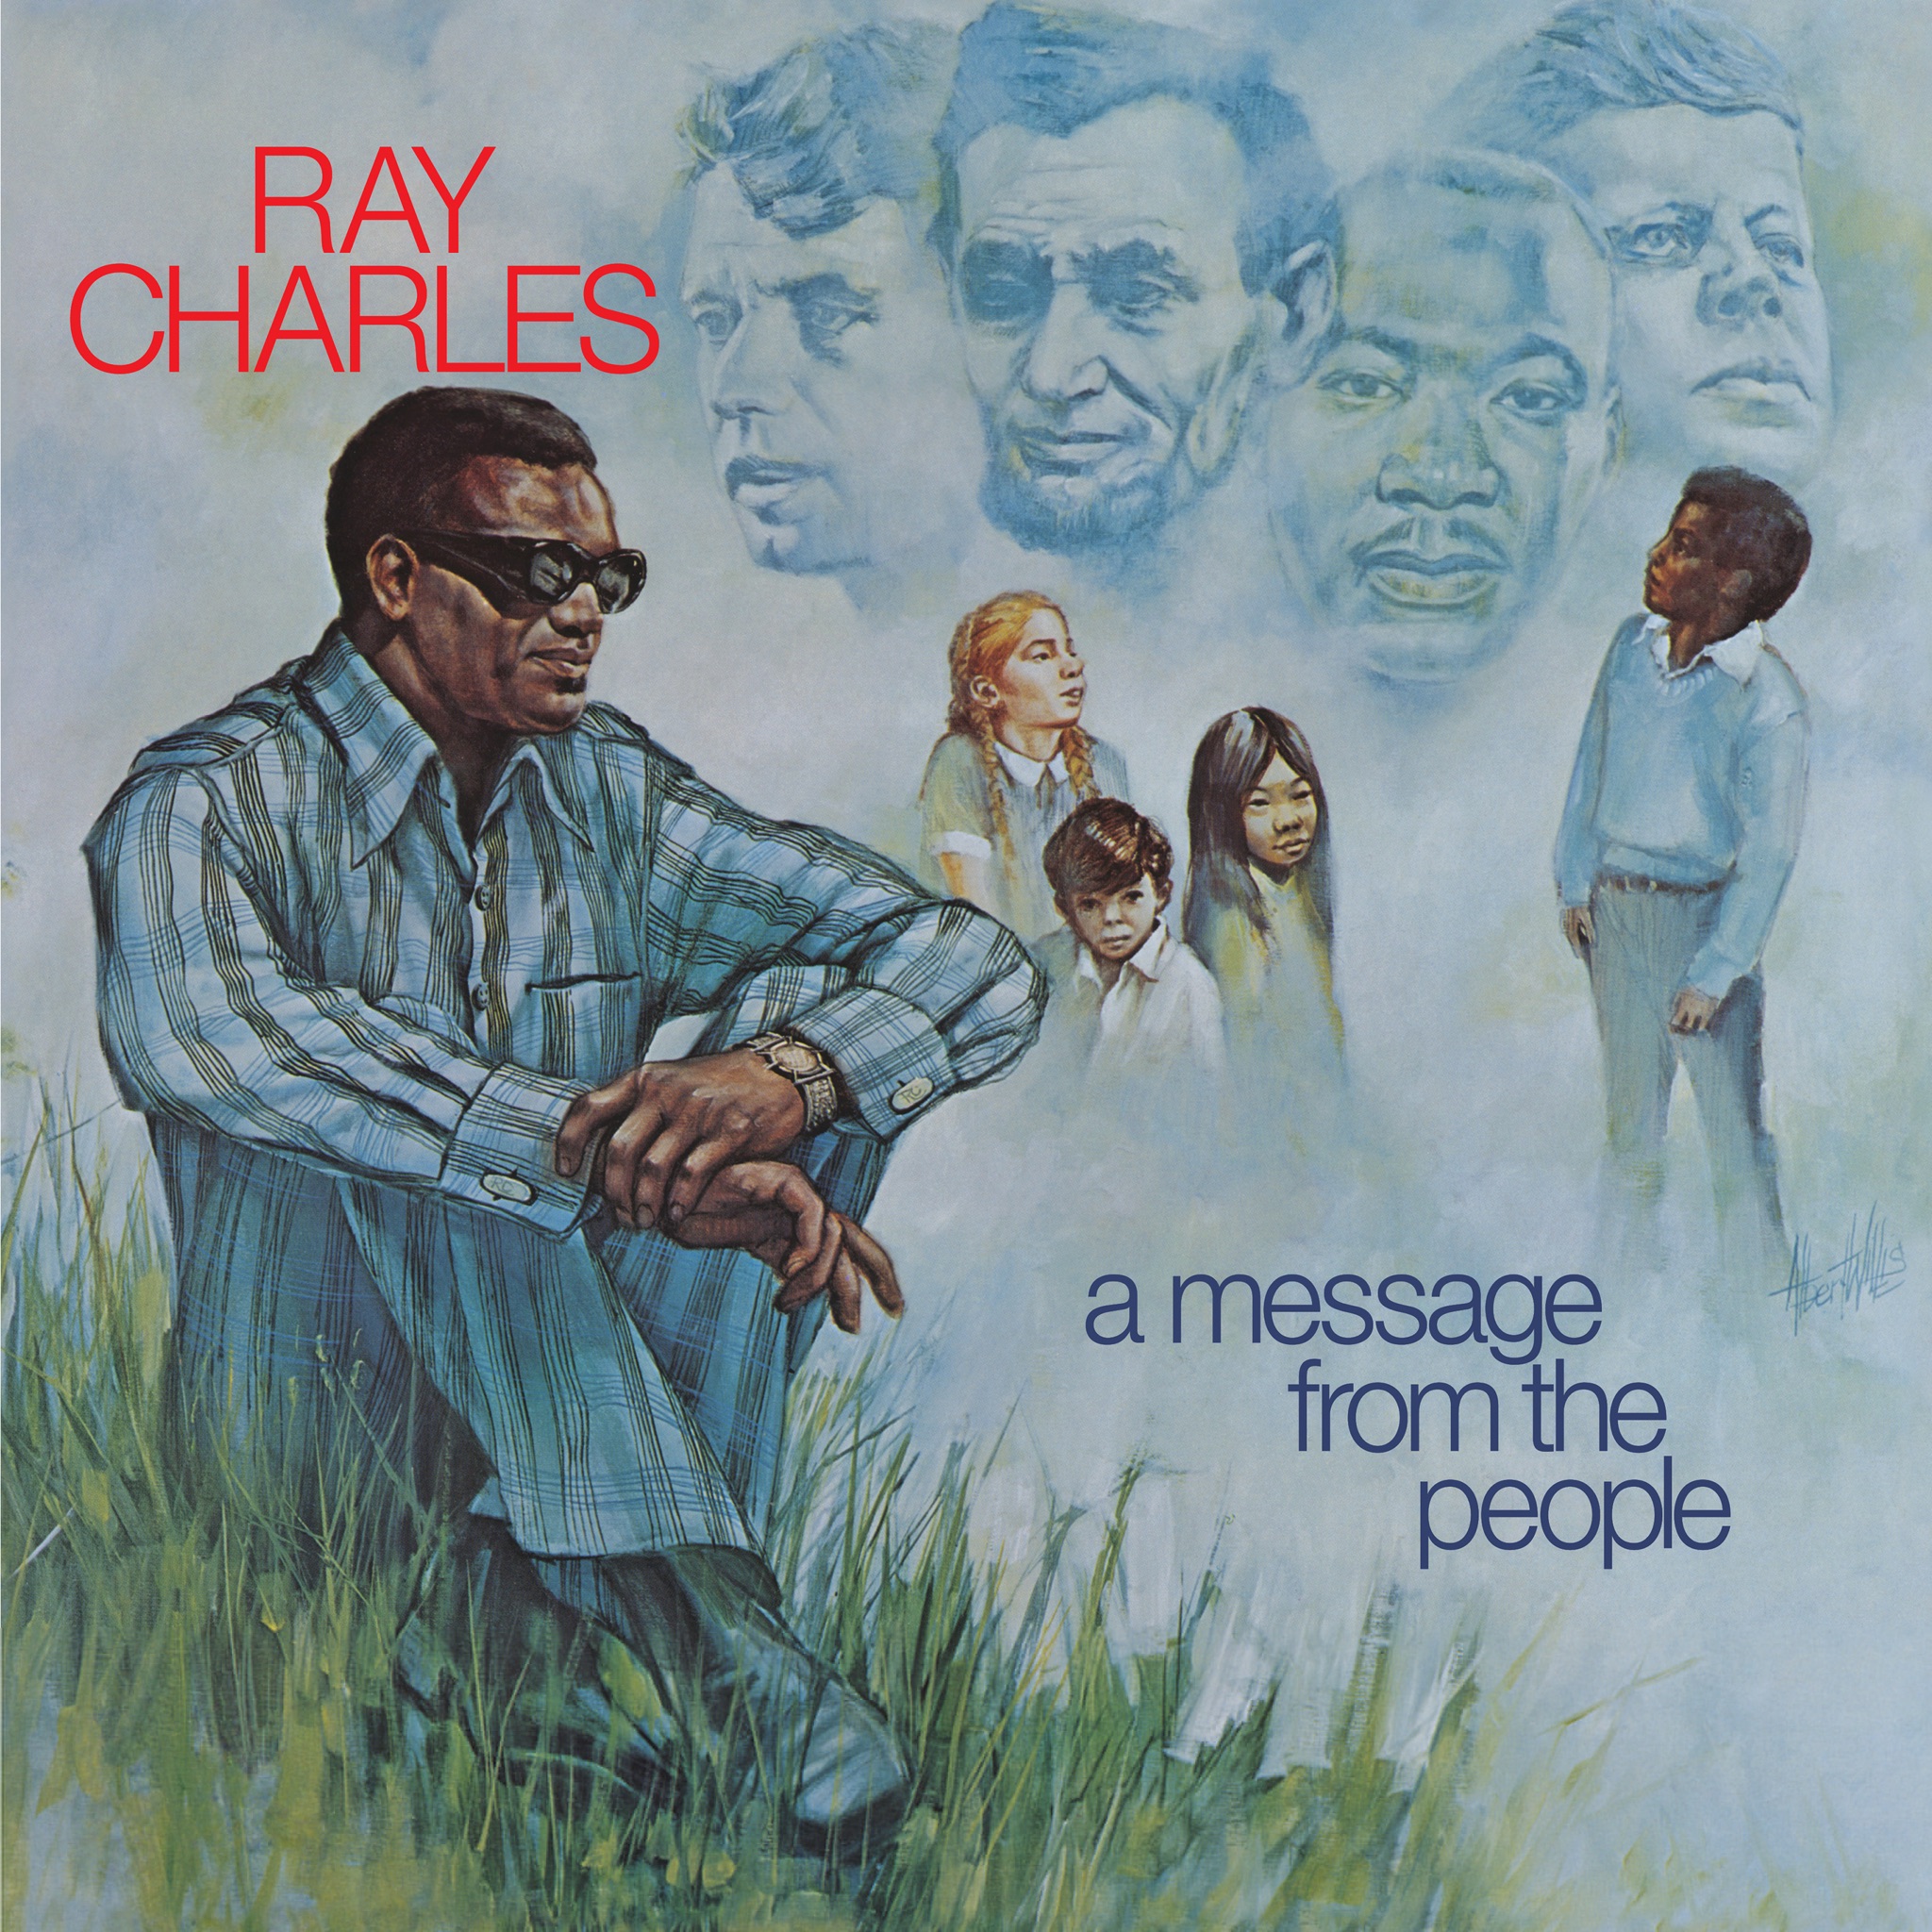 The 50th Anniversary of Ray Charles’ landmark recording A Message from the People